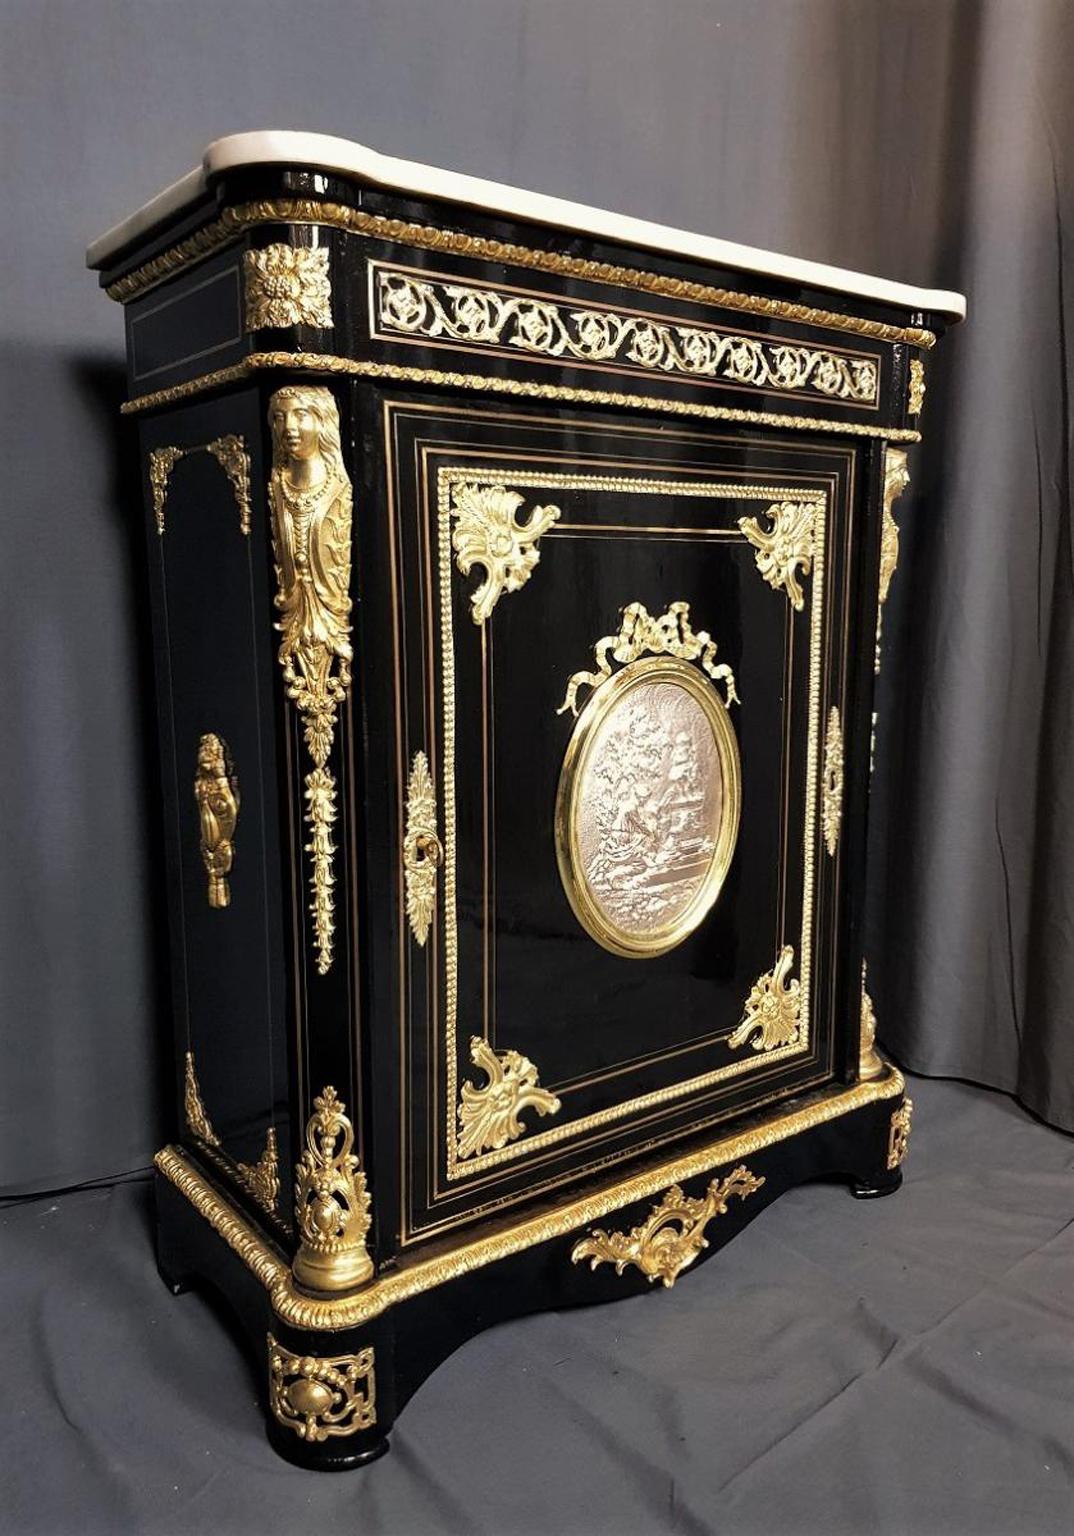 Napoleon IIII cabinet in Boulle marquetry style in brass and a central medallion tow-colored in silver and a delicate bronze ribbon frame around it. Beautifully decorated with important gilt bronze ornamentations such as spandrels and caryatids. The